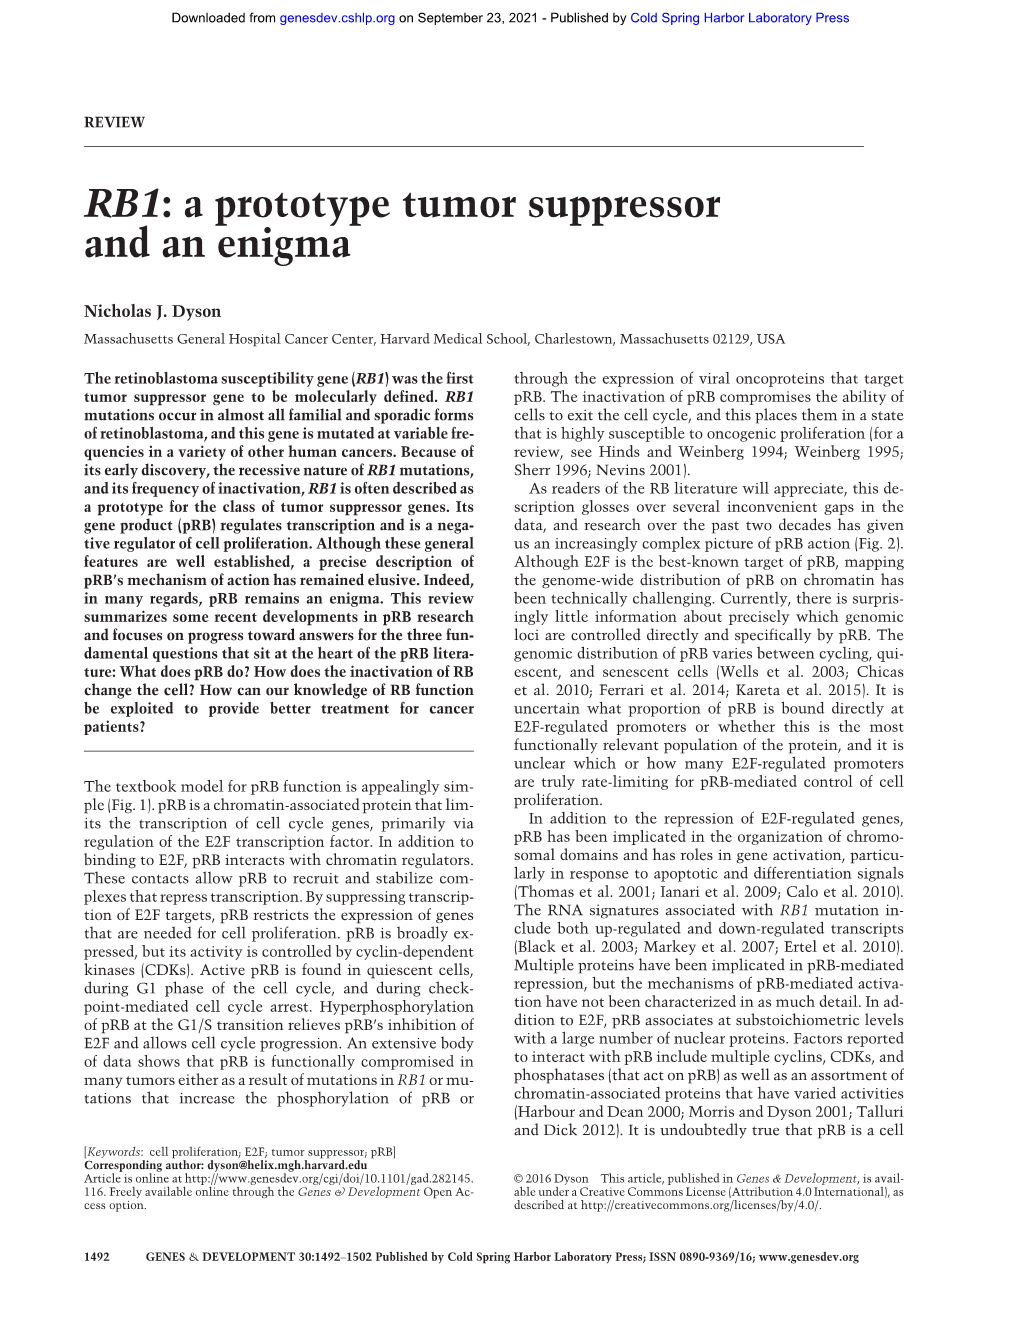 RB1: a Prototype Tumor Suppressor and an Enigma